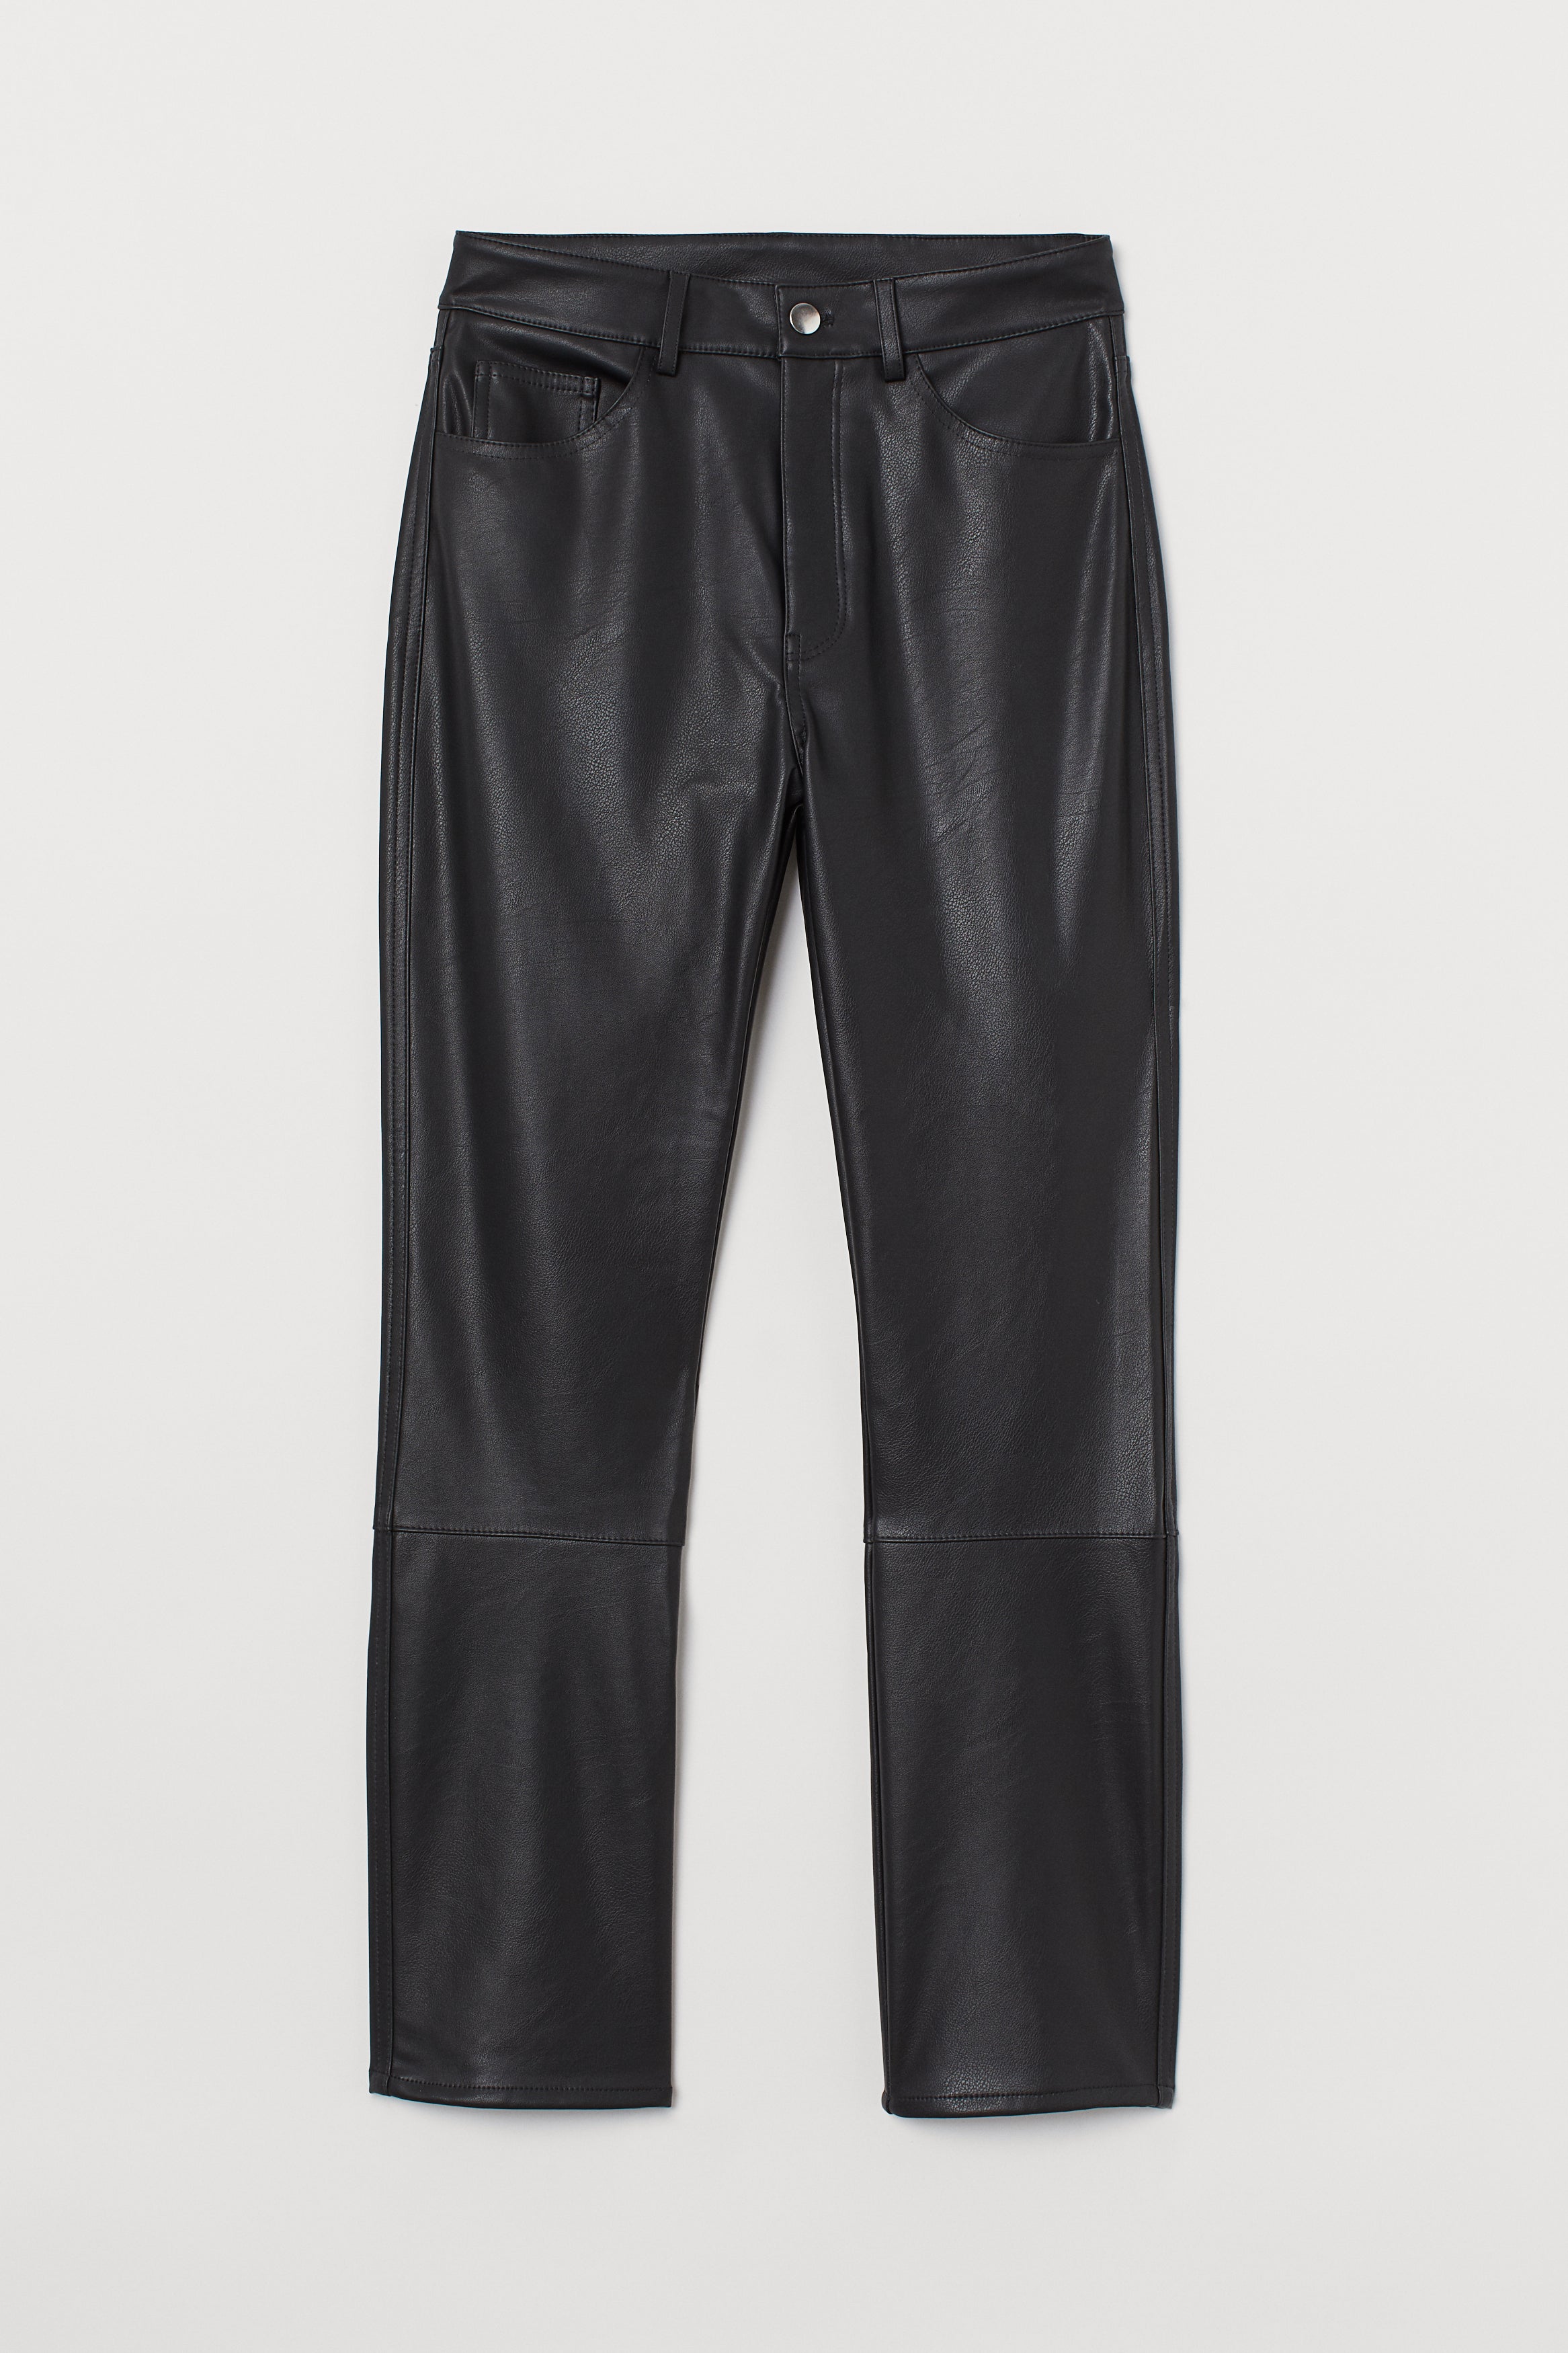 next leather look pants